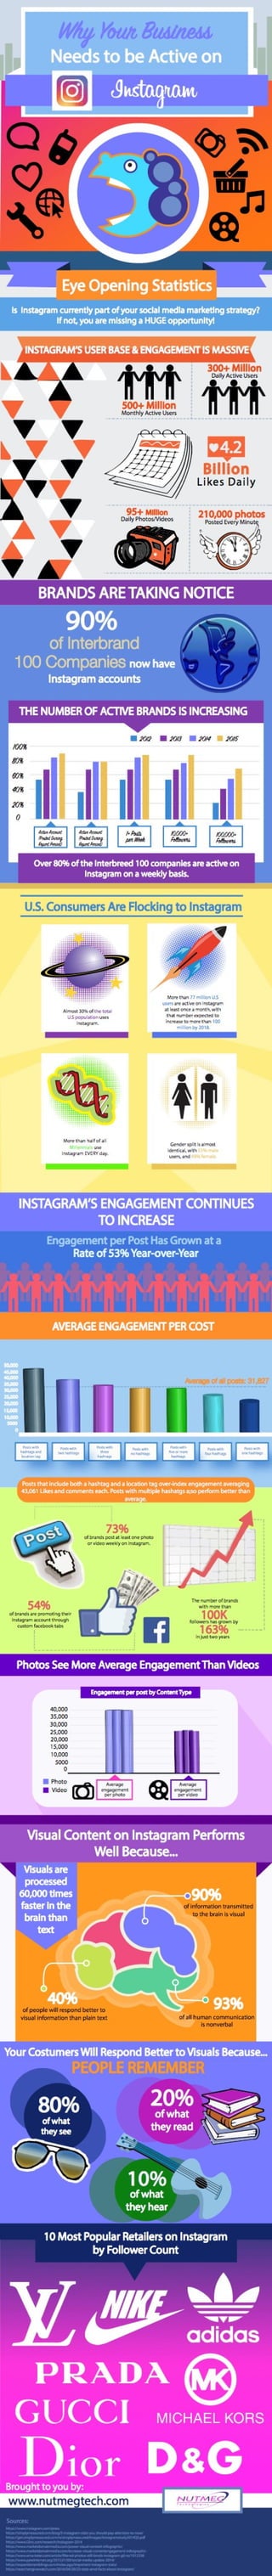 10 Most Popular Retailers on Instagram
by Follower Count
Brought to you by:
Visual Content on Instagram Performs
Well Because...
Photos See More Average Engagement Than Videos
Your Costumers Will Respond Better to Visuals Because...
Eye Opening Statistics
4.2
www.nutmegtech.com
Visuals are
processed
60,000 times
faster in the
brain than
text
Needs to be Active on
INSTAGRAM’S USER BASE & ENGAGEMENT IS MASSIVE
BRANDS ARE TAKING NOTICE
THE NUMBER OF ACTIVE BRANDS IS INCREASING
INSTAGRAM’S ENGAGEMENT CONTINUES
TO INCREASE
AVERAGE ENGAGEMENT PER COST
PEOPLE REMEMBER
Why Your Business
100%
80%
60%
40%
20%
0
2012 2013 2014 2015
Active Account
(Posted During
Report Period)
Active Account
(Posted During
Report Period)
1+ Posts
per Week
10,000+
Followers
100,000+
Followers
Over 80% of the Interbreed 100 companies are active on
Instagram on a weekly basis.
Photo
Video
0
5000
10,000
15,000
20,000
25,000
30,000
35,000
40,000
Average
engagement
per photo
Average
engagement
per video
of Interbrand
100 Companies now have
Instagram accounts
90%
0
5000
10,000
15,000
20,000
25,000
30,000
35,000
40,000
45,000
50,000
Average of all posts: 31,827
U.S. Consumers Are Flocking to Instagram
Engagement per Post Has Grown at a
Rate of 53% Year-over-Year
Is Instagram currently part of your social media marketing strategy?
If not, you are missing a HUGE opportunity!
90%
40% 93%
of all human communication
is nonverbal
of people will respond better to
visual information than plain text
of information transmitted
to the brain is visual
80%
of what
they see
10%
of what
they hear
20%
of what
they read
Posts that include both a hashtag and a location tag over-index engagement averaging
43,061 Likes and comments each. Posts with multiple hashatgs a;so perform better than
average.
Posts with
hashtags and
location tag
Posts with
two hashtags
Posts with
three
hashtags
Posts with
no hashtags
Posts with
five or more
hashtags
Posts with
four hashtags
Posts with
one hashtags
Sources:
https://www.instagram.com/press
https://simplymeasured.com/blog/5-instagram-stats-you should-pay-attention-to-now/
https://get.simplymeasured.com/rs/simplymeasured/images/instagramstudy2014Q3.pdf
https://www.I2inc.com/research/instagram-2014
https://www.marketdomainmedia.com/power-visual-content-infographic/
https://www.marketdomainmedia.com/increase-visual-contentengagement-inforgraphic-
https://www.emarketer.com/article/filtered-photos-still-brnds-instagram-g0-to/1012238
https://www.pewinternet.org/2015.01/09/social-media-update-2014/
https://expanderramblings.com/index.pgp/important-instagram-stats/
https://searchenginewatch.com/2016/04/20/23-stats-amd-facts-about-instagram/
Engagement per post by Content Type
Billion
Likes Daily
95+ Million
Daily Photos/Videos
210,000 photos
Posted Every Minute
300+ Million
Daily Active Users
500+ Million
Monthly Active Users
More than half of all
Millennials use
Instagram EVERY day.
Gender split is almost
identical, with 51% male
users, and 49% female.
Almost 30% of the total
U.S population uses
instagram.
More than 77 million U.S
users are active on Instagram
at least once a month, with
that number expected to
increase to more than 100
million by 2018.
73%of brands post at least one photo
or video weekly on instagram.
54%of brands are promoting their
instagram account through
custom facebook tabs
163%
100K
The number of brands
with more than
followers has grown by
in just two years
 